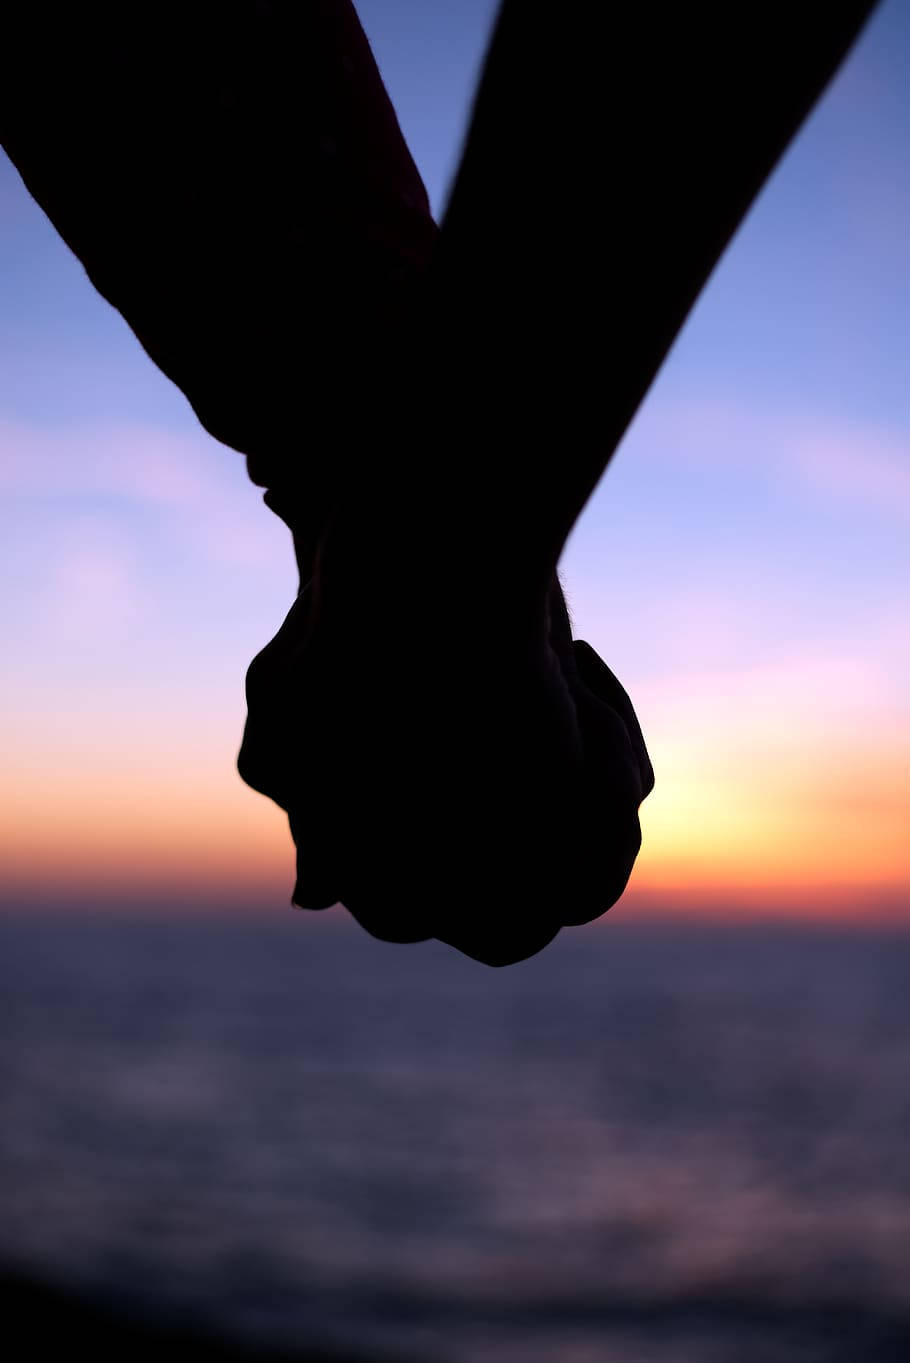 Holding Hands Silhouette In Horizon Sunset Background